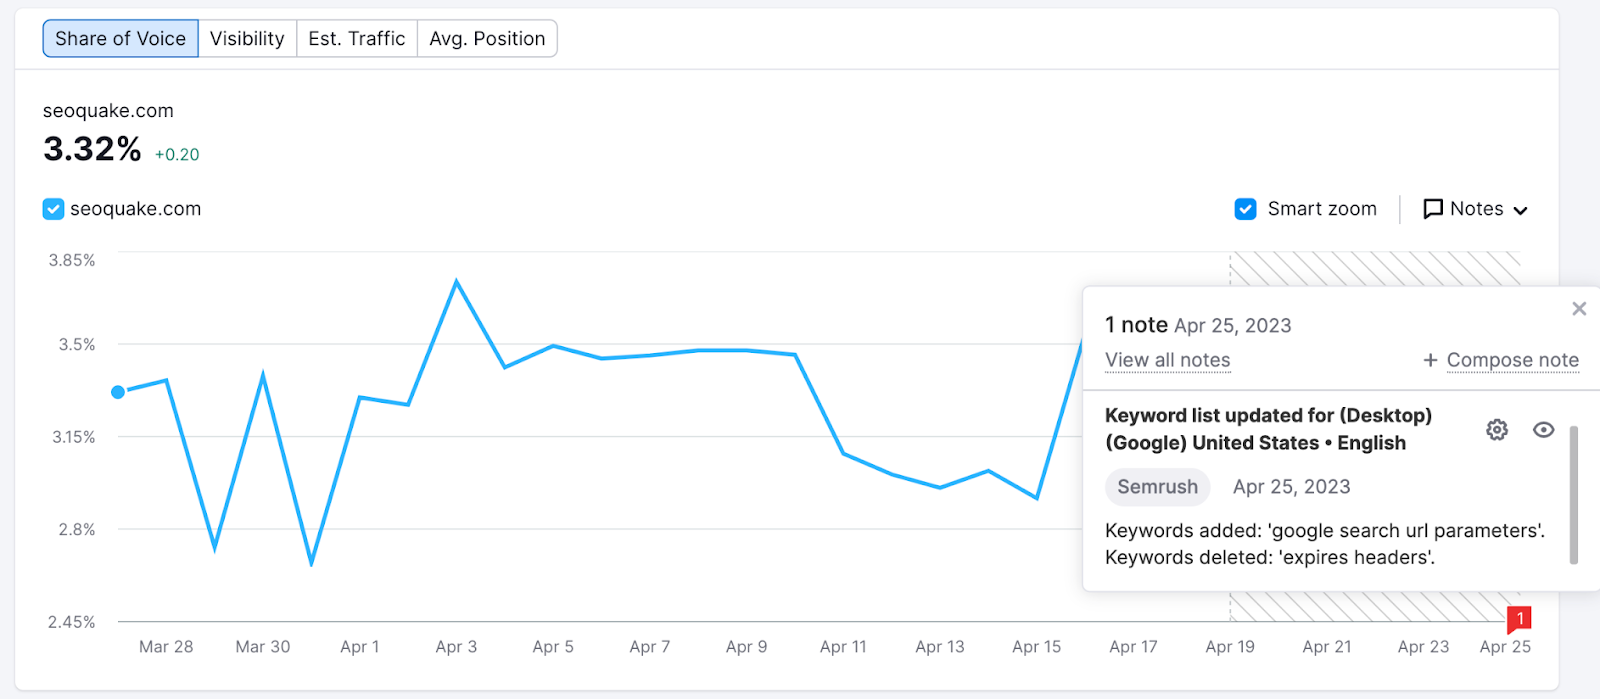 A screenshot of the trend chart in Position Tracking Overview with a note about adding/deleting keywords